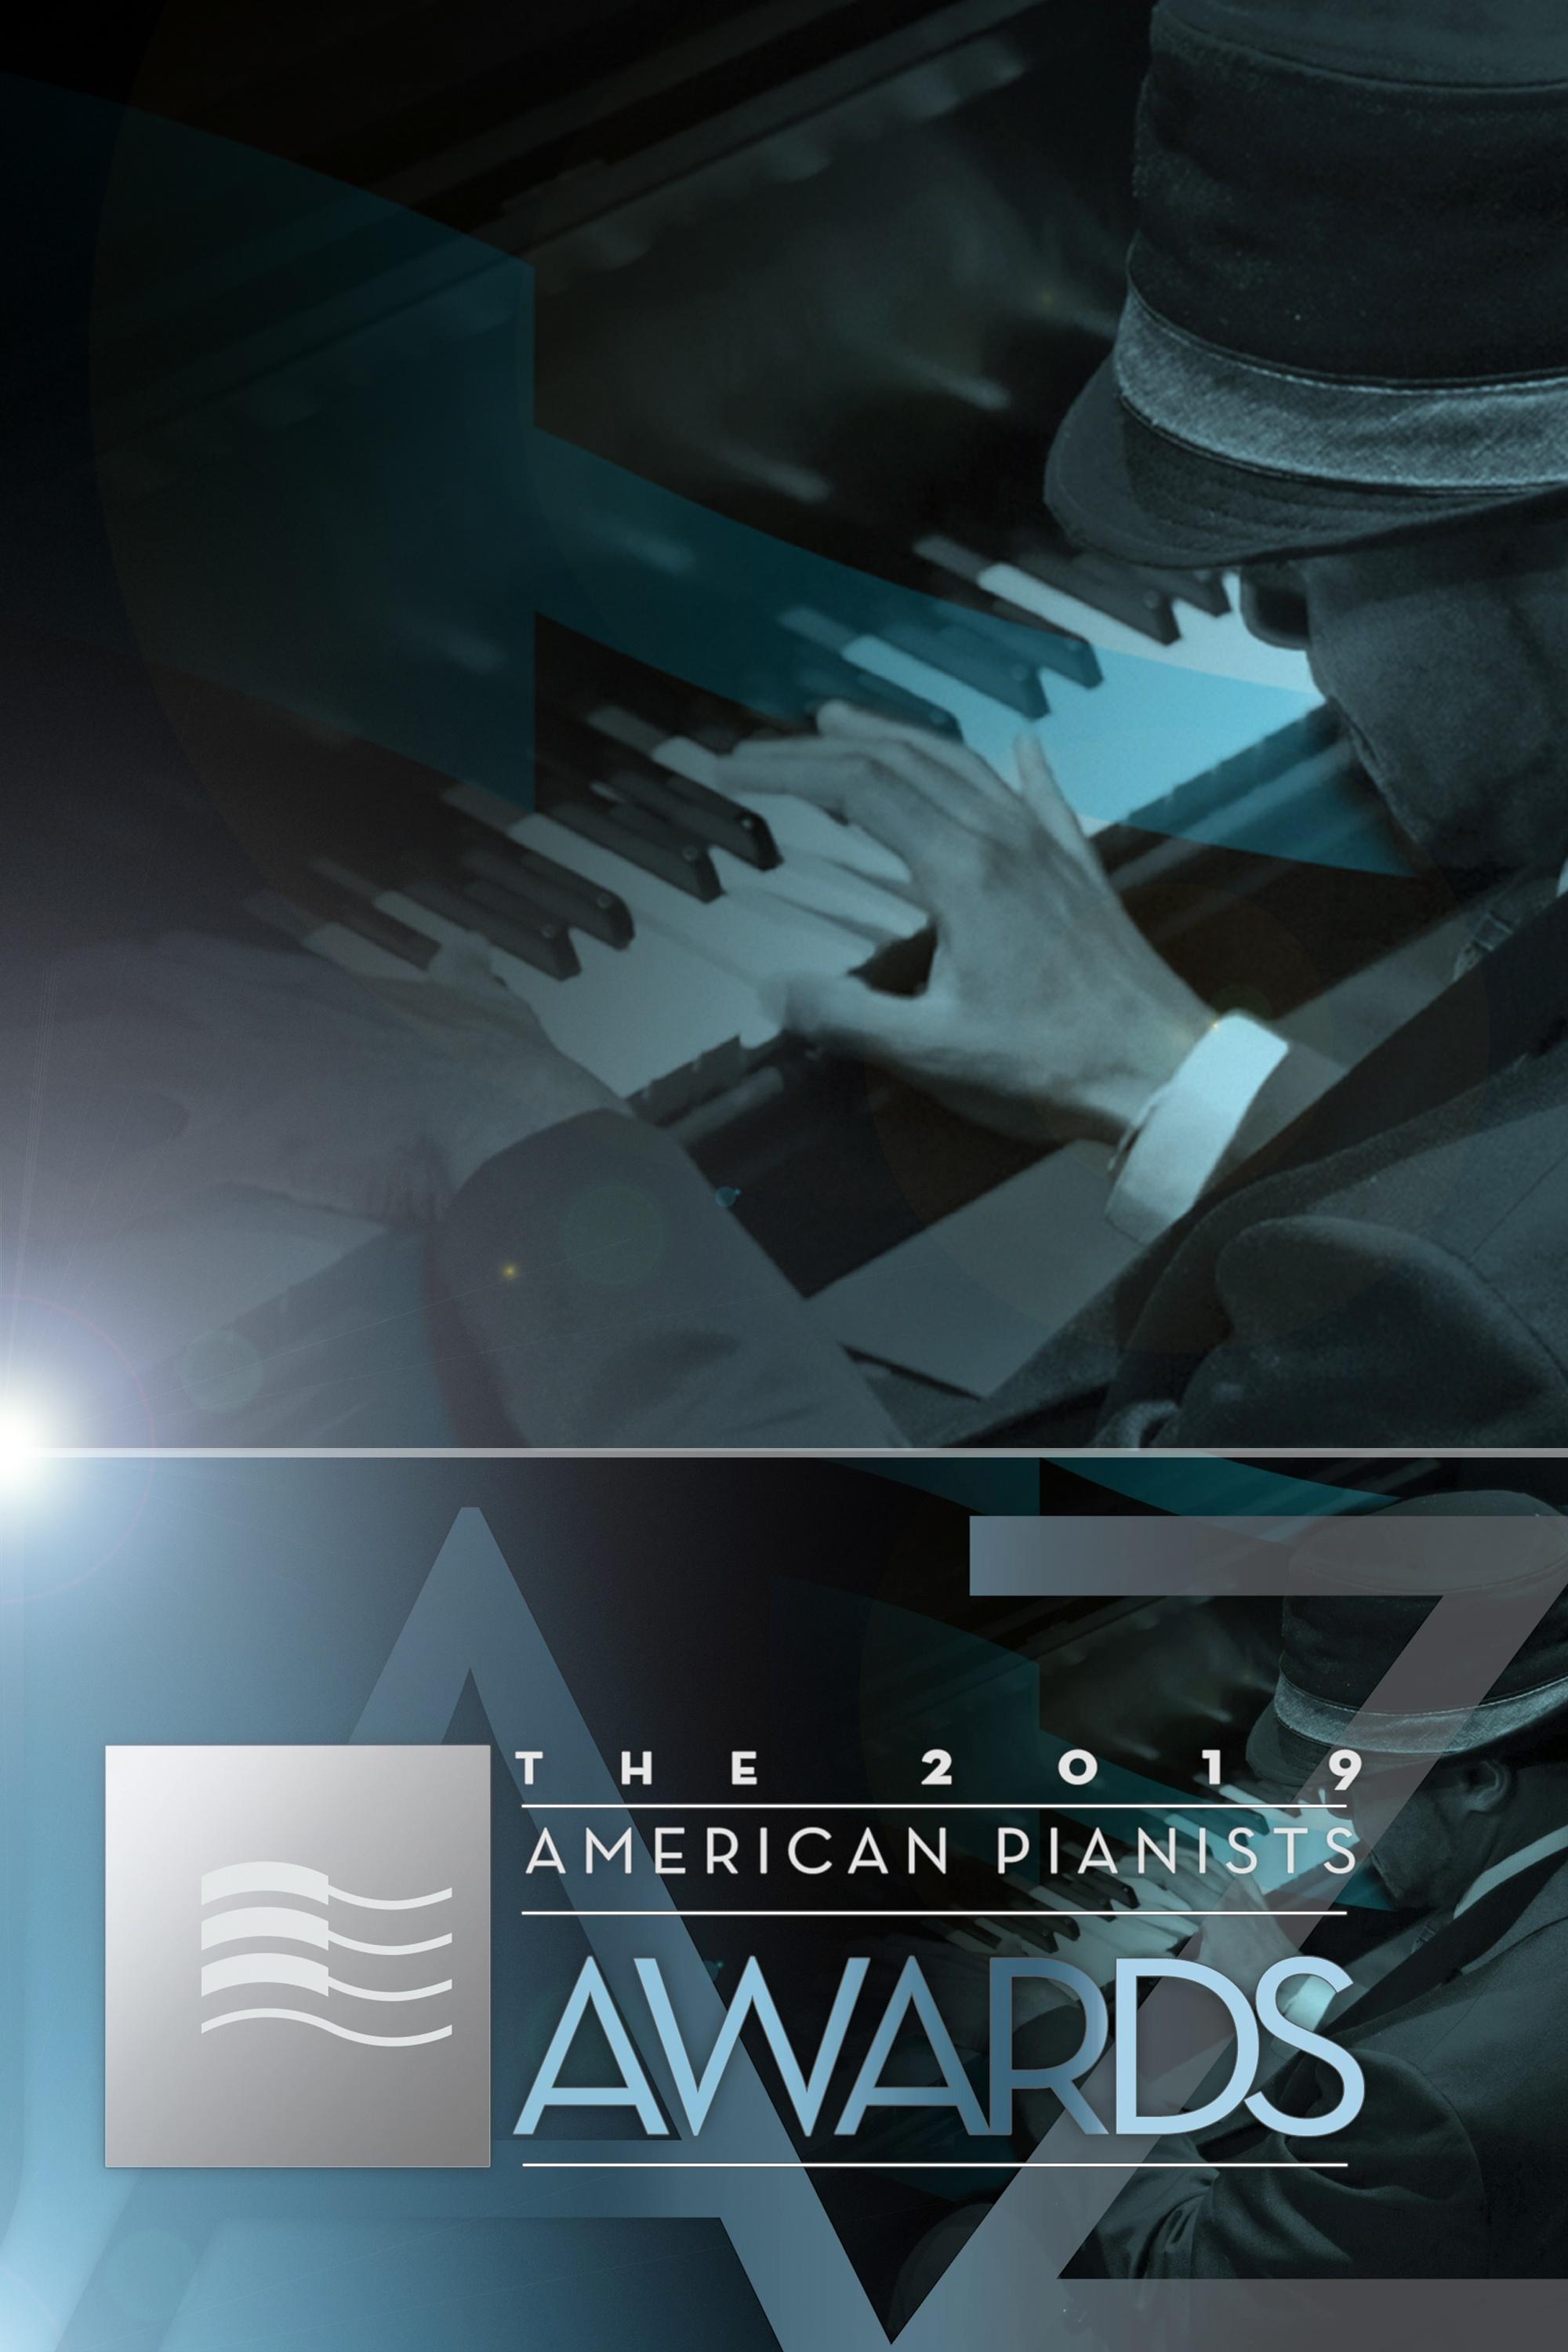 A poster of an awards program. The cover shows a stylized photo of a person playing piano.